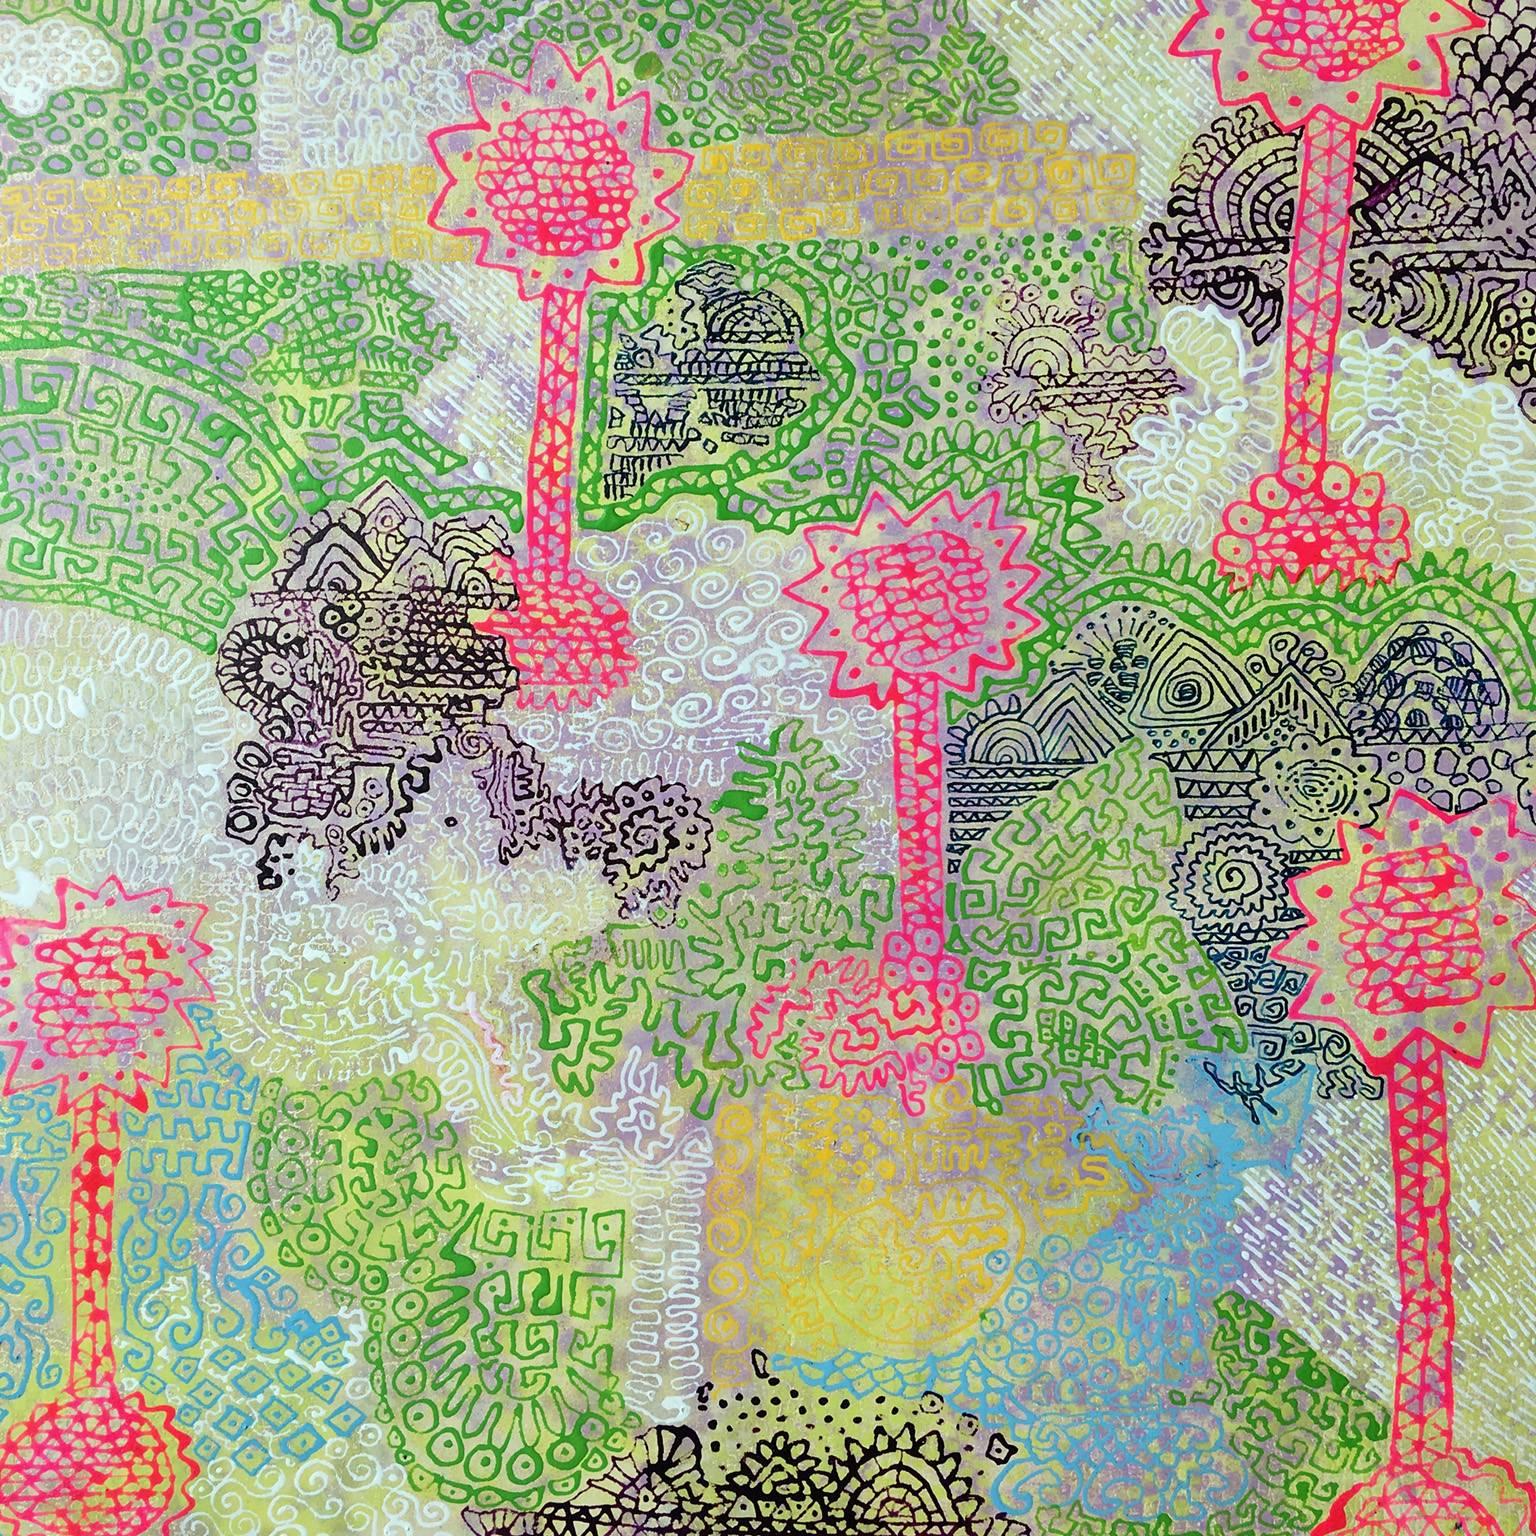 "This is My Land" texture of linear symbols on pink, green and blue background - Art by Rebecca Darlington